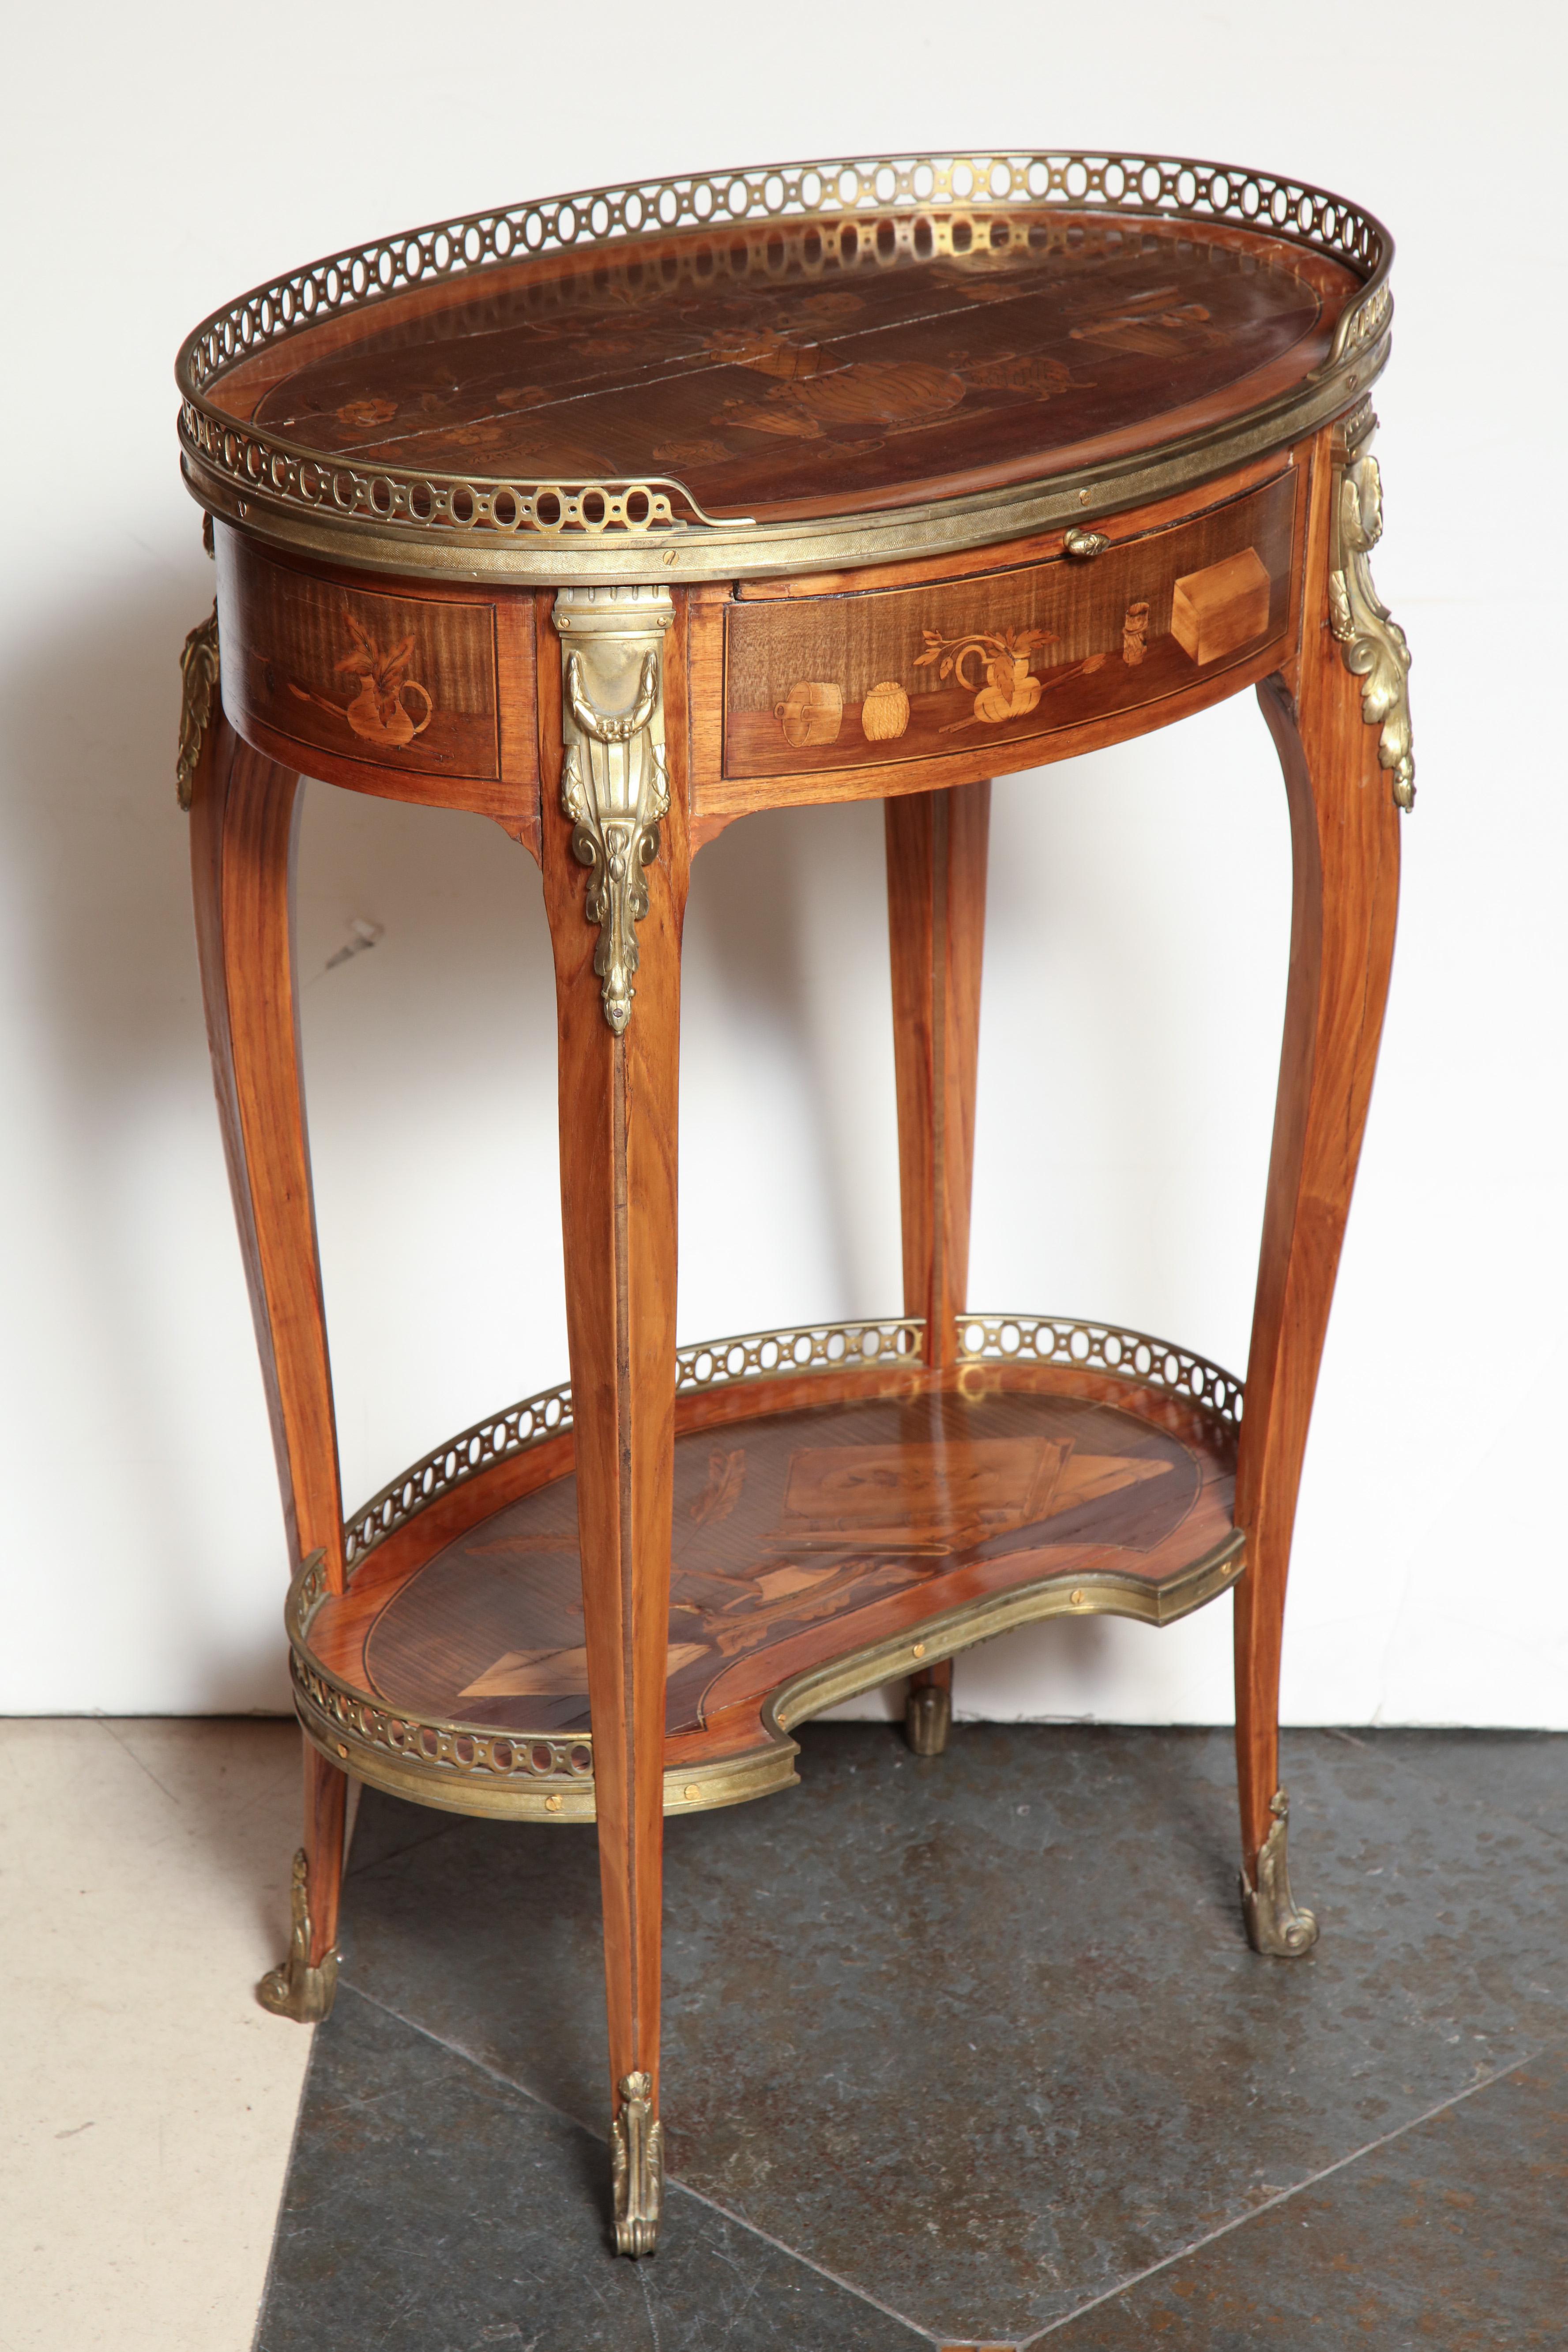 A fine French Louis XV-XVI transitional oval side table with elaborate marquetry decorative scenes, in the manner of Charles Topino. With pierced bronze galleries, mounts, and sabots.